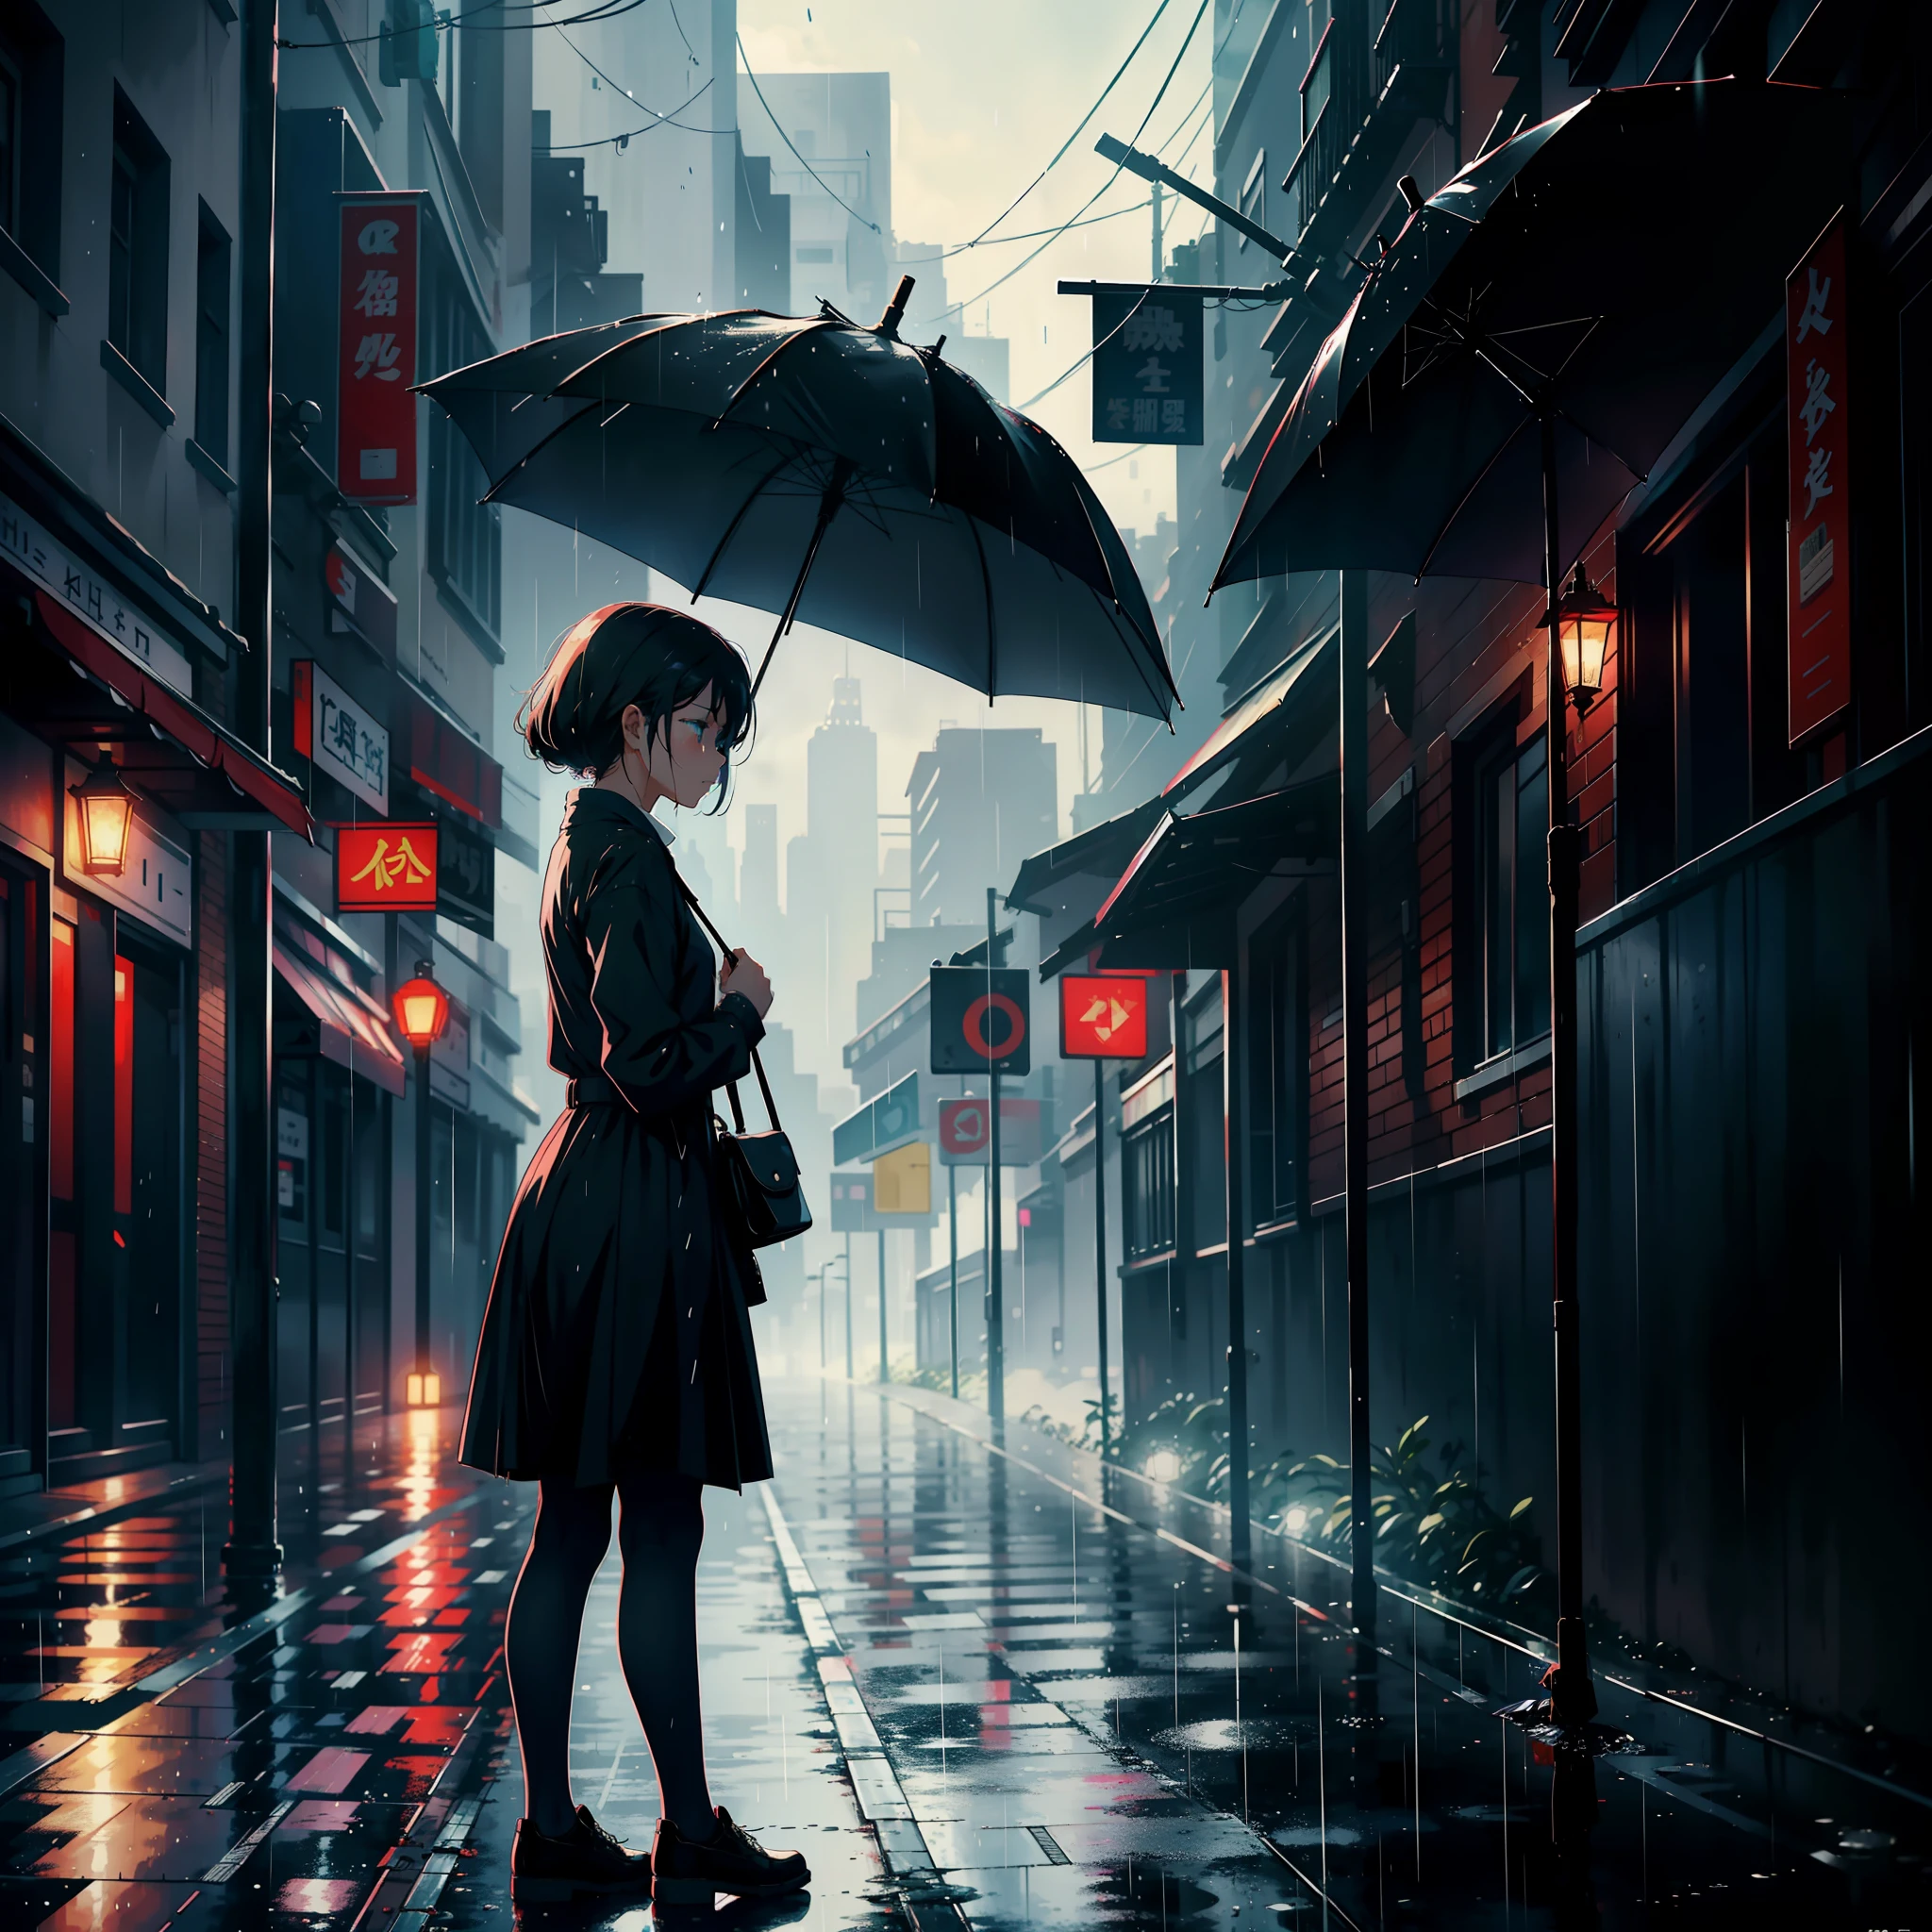 A girl with an umbrella stood by the side of the street, crying, looking sad and raining